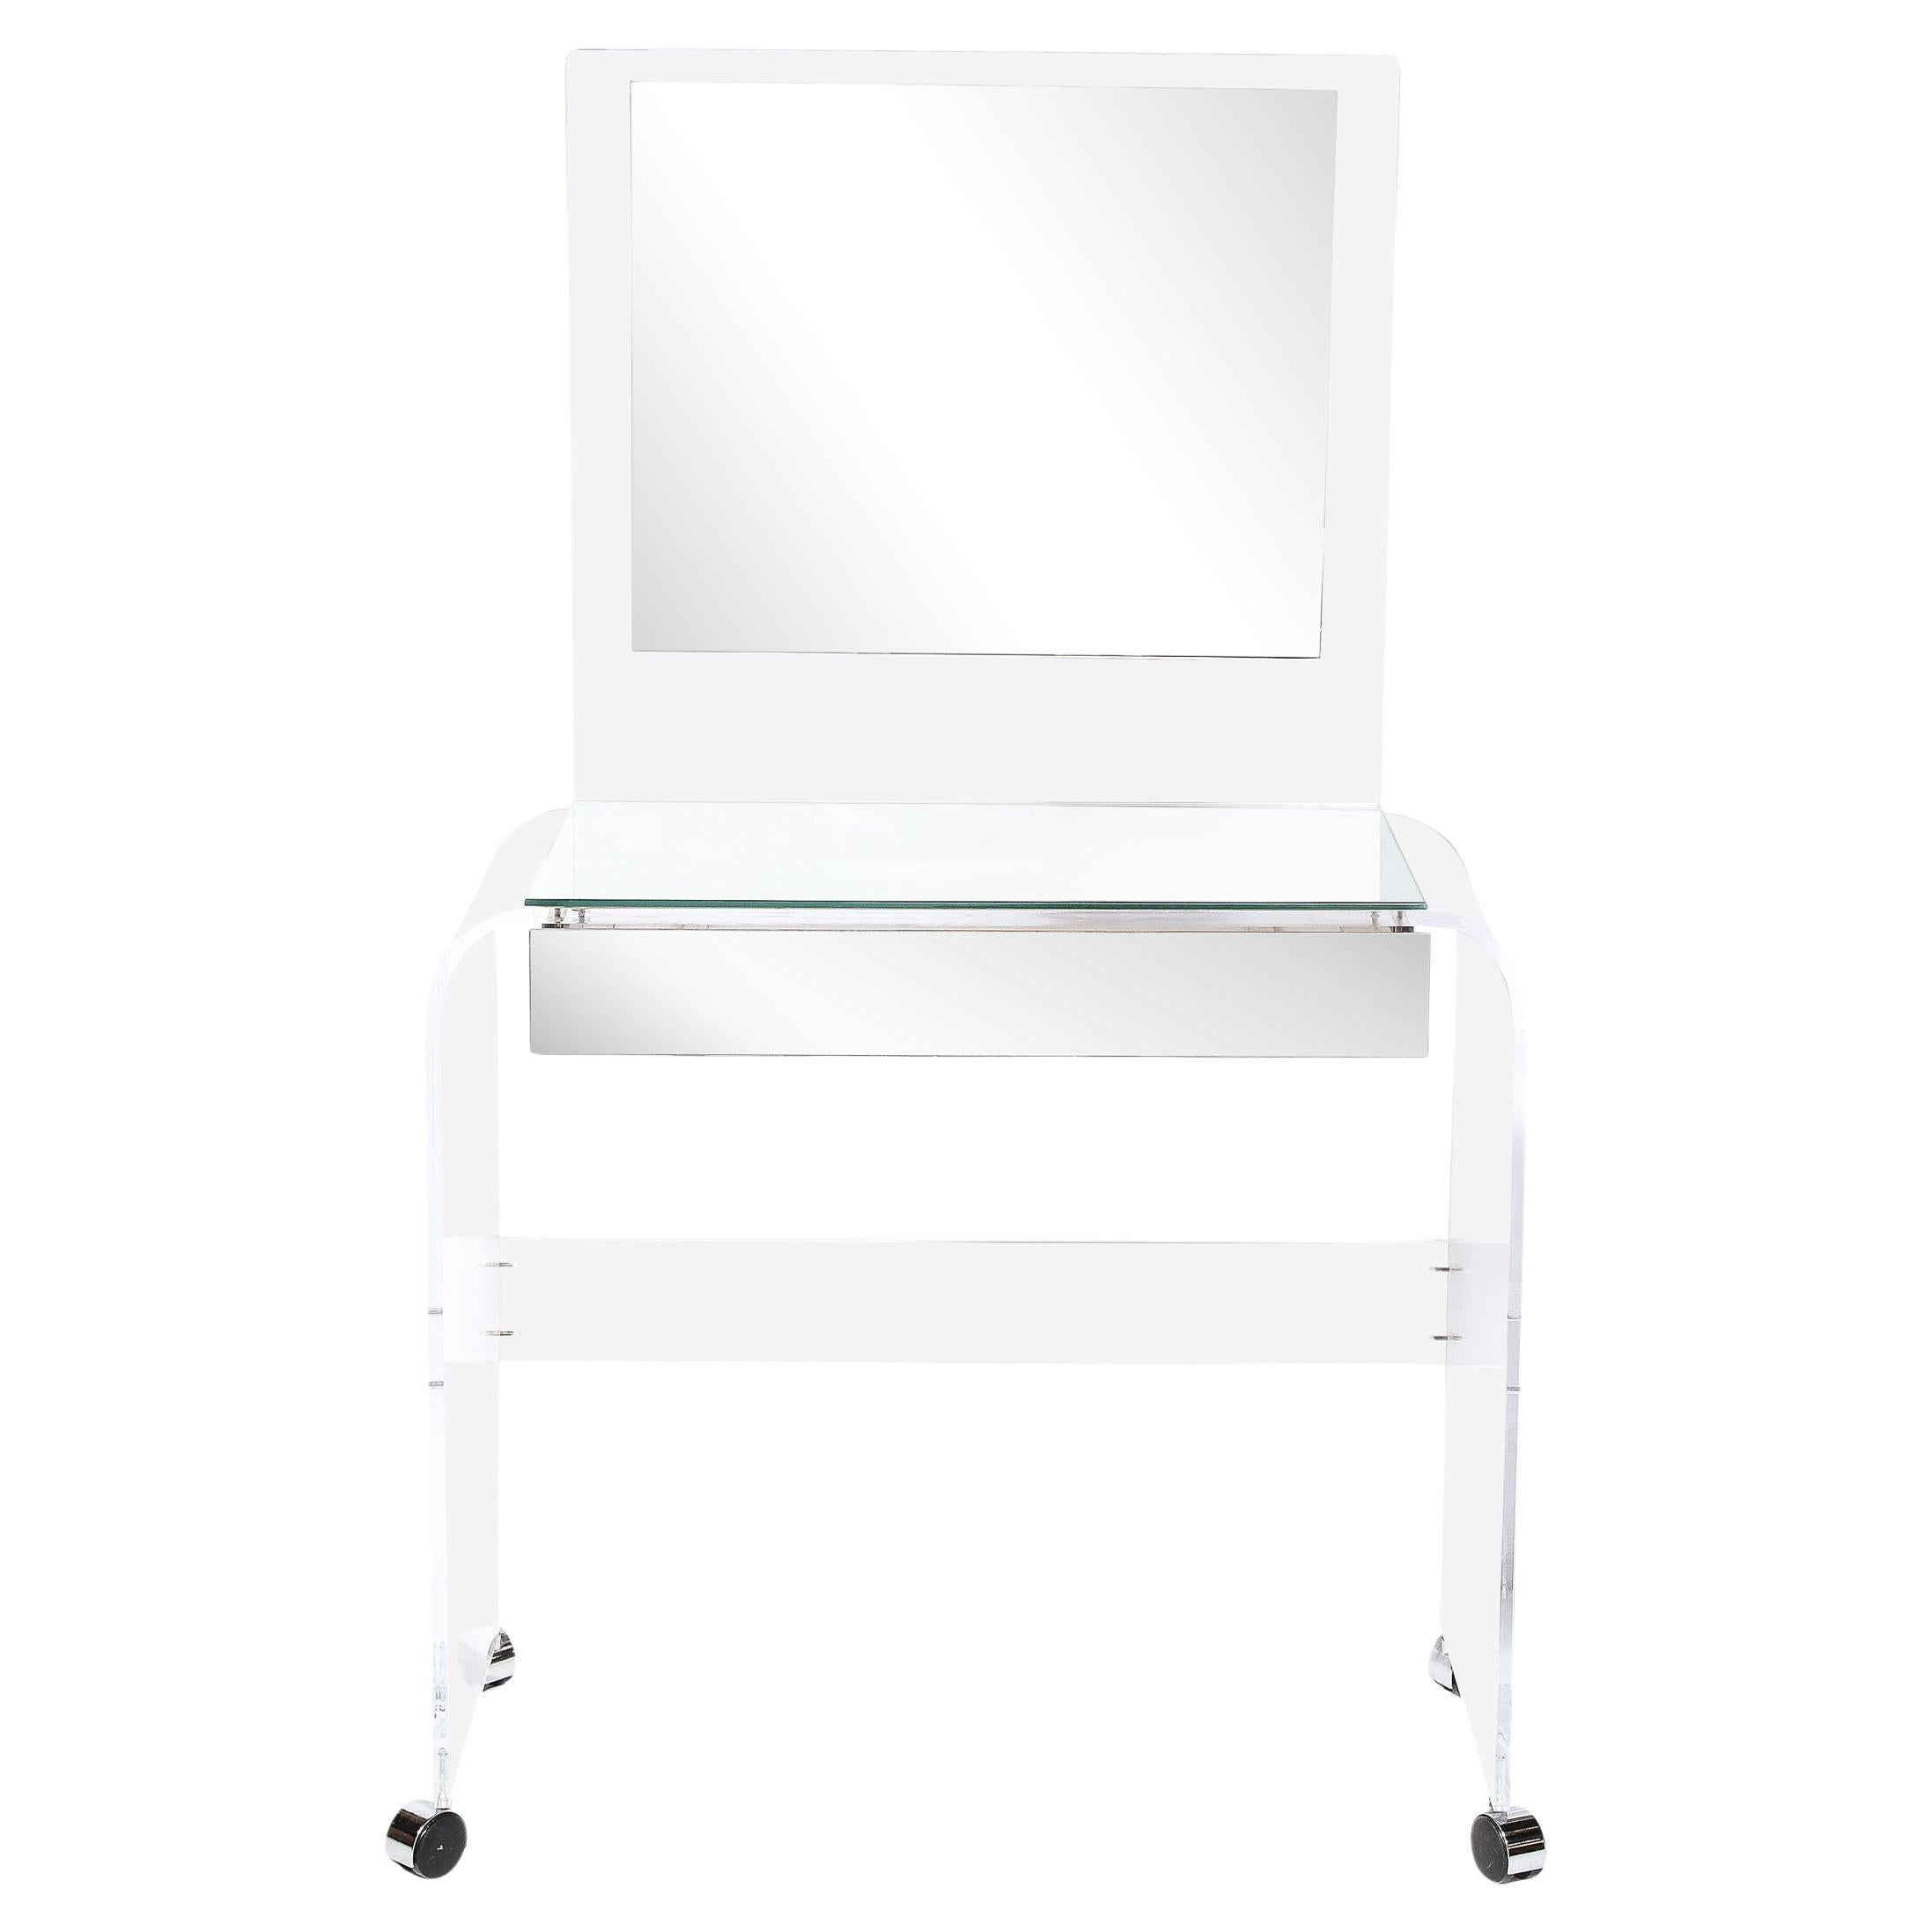 This Modernist Vanity, originating from the United States, circa 1970. is a unique and elegant example of modernist design. Constructed in Lucite and mirror glass, the piece exemplifies Mid-Century Modernism in its use of minimal, sleek and